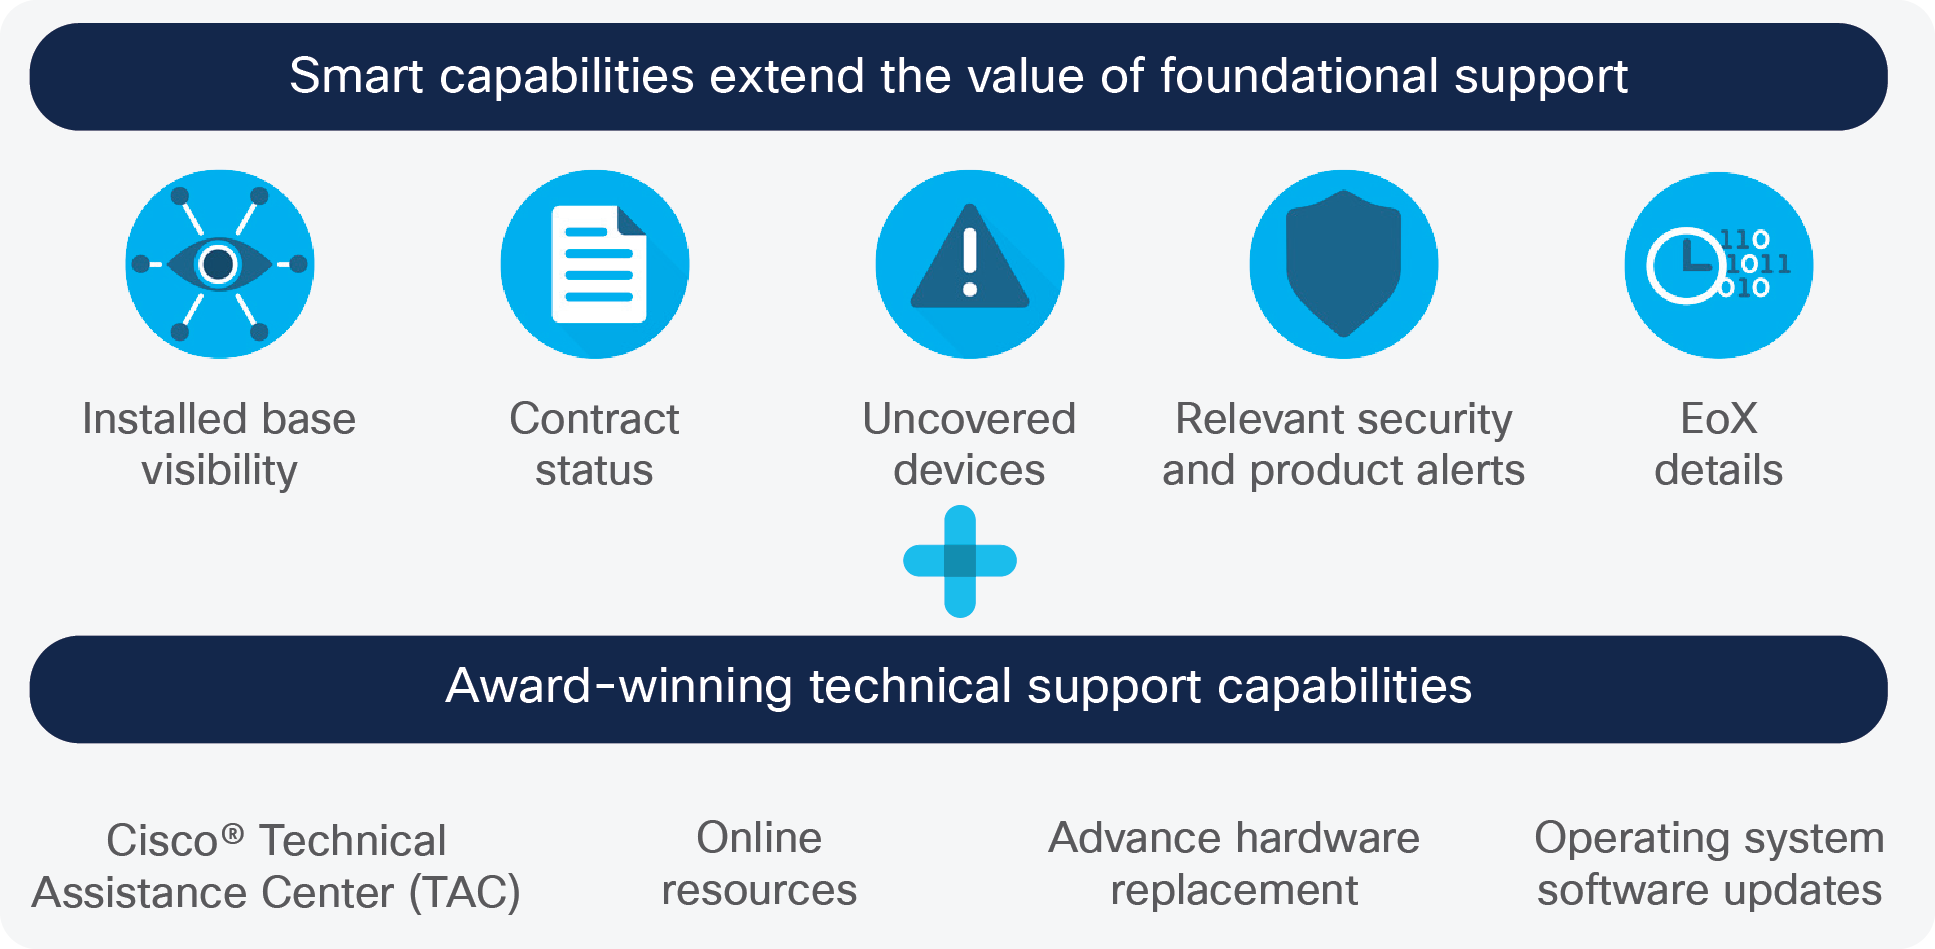 Smart capabilities extend the value of foundational support